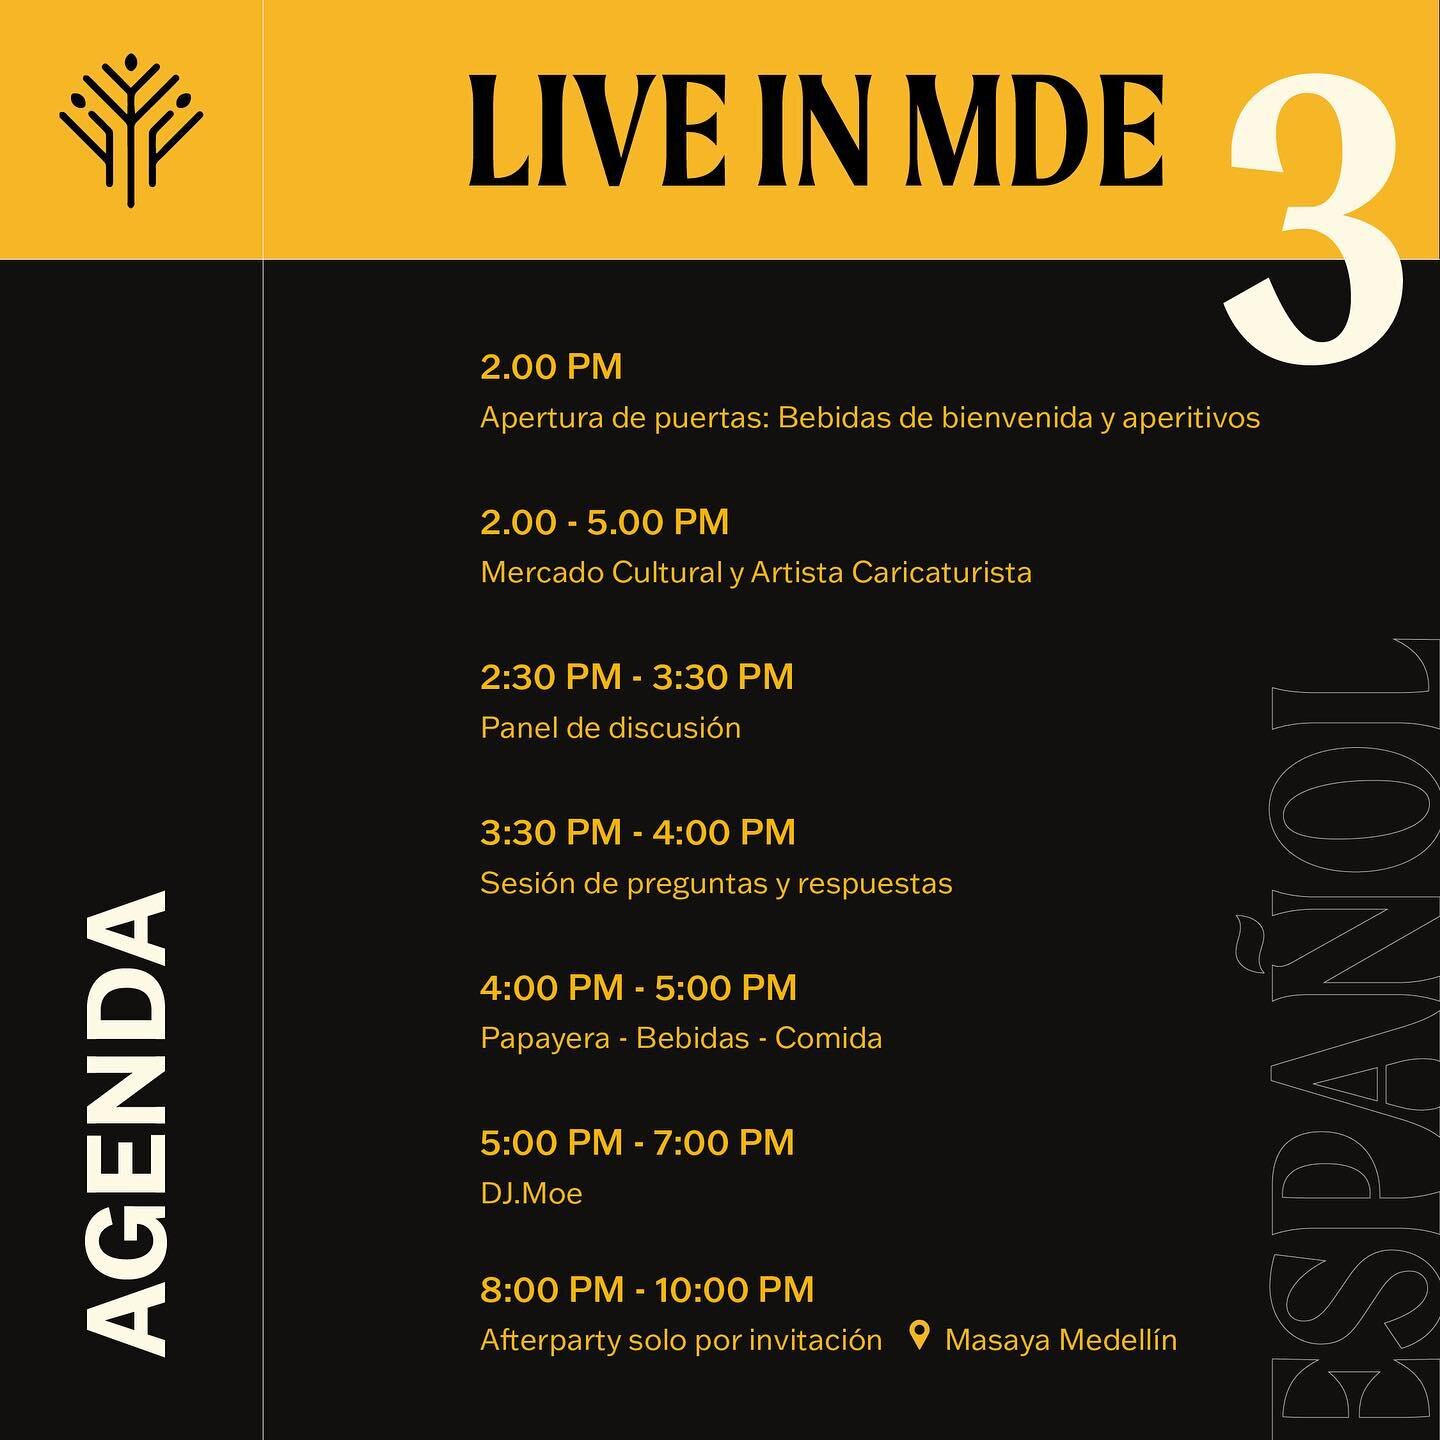 🌟 Get Ready for Live In MDE 3 🌟

This Saturday, the enchantment of Live In MDE 3 comes to life! Take a peek at our full schedule, brimming with exciting activities and opportunities for engagement tailored just for you.

🚪 Doors Open at 2 PM: We r